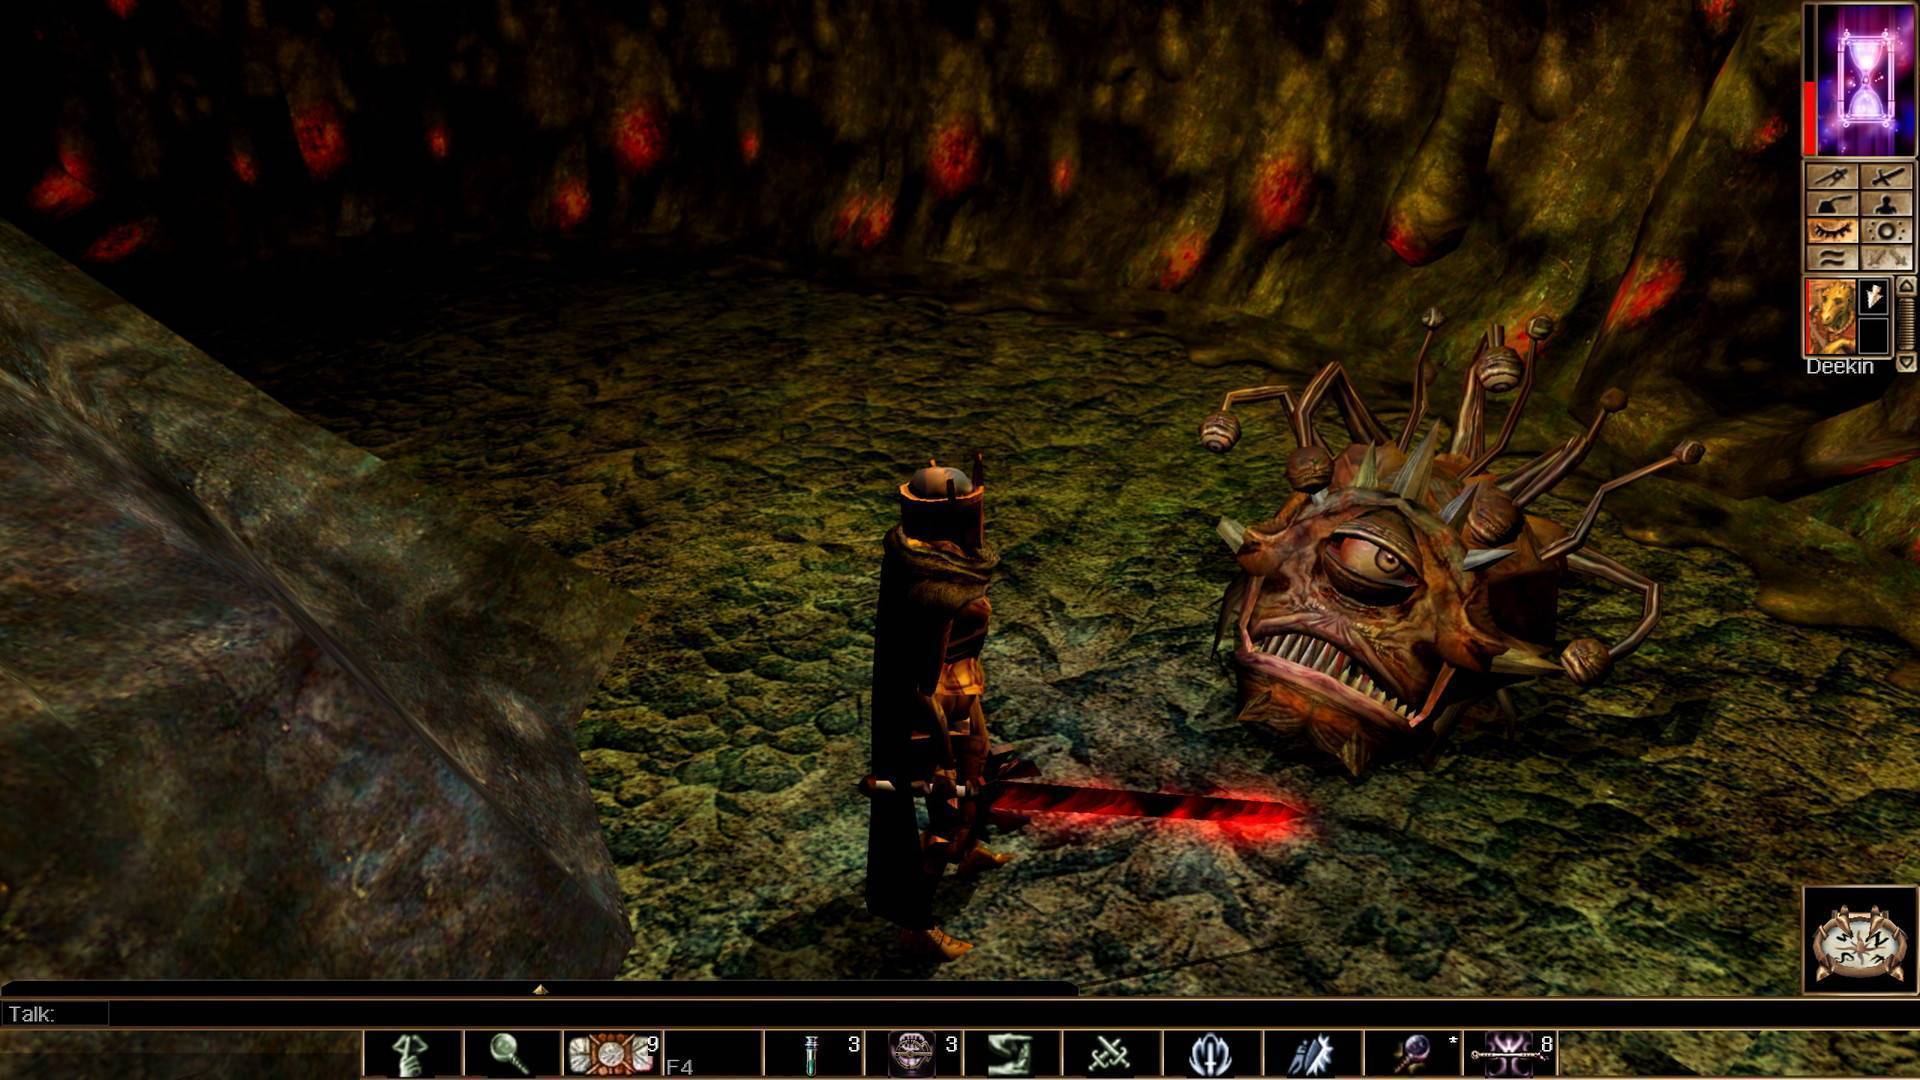 neverwinter nights 2 free download game discs